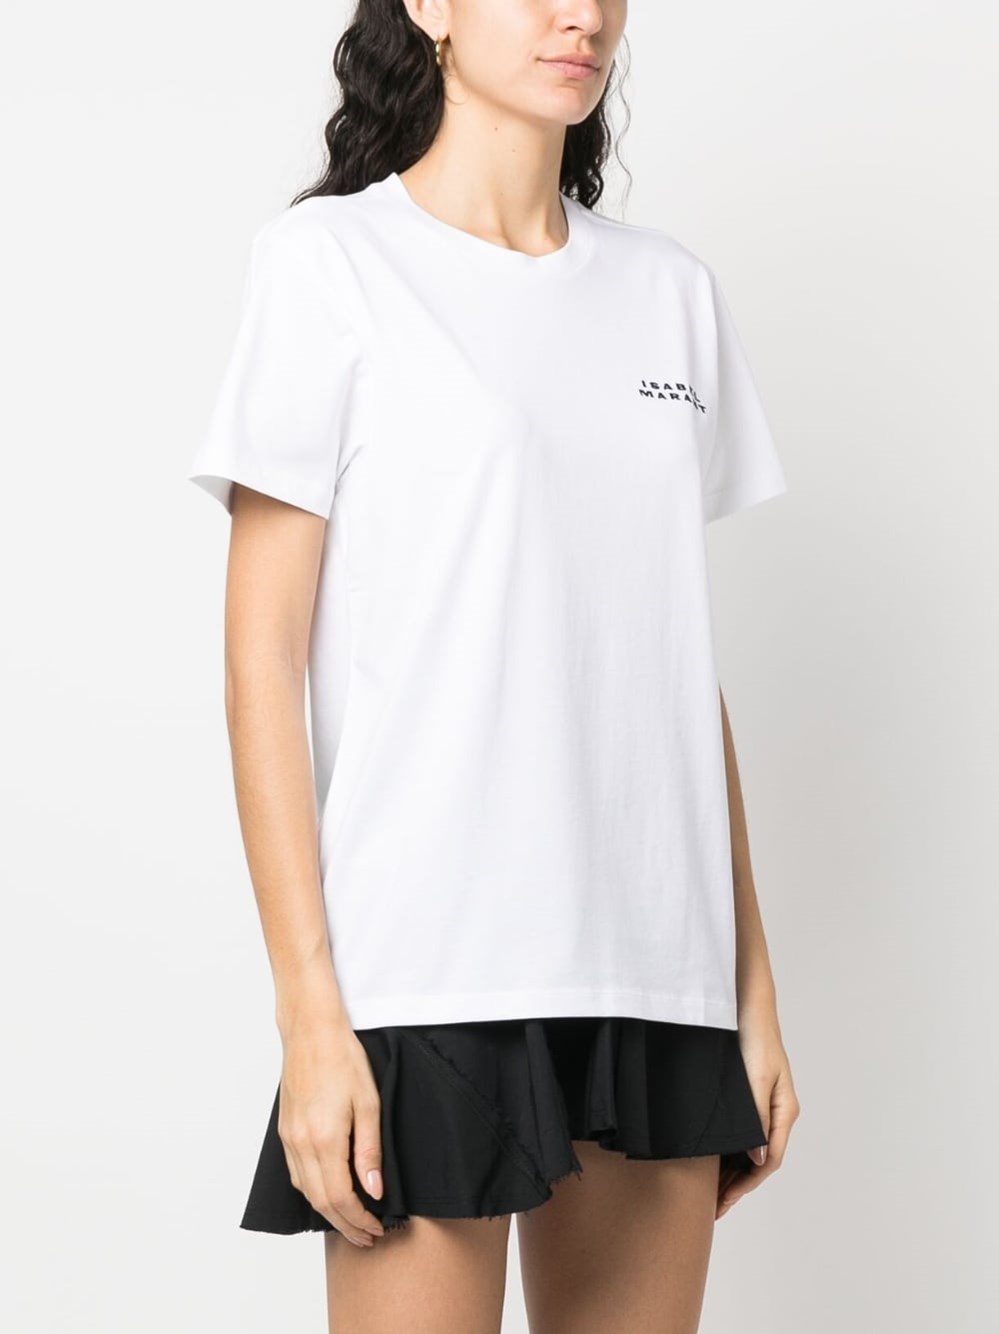 isabel marant LOGO T-SHIRT available on montiboutique.com - 54089